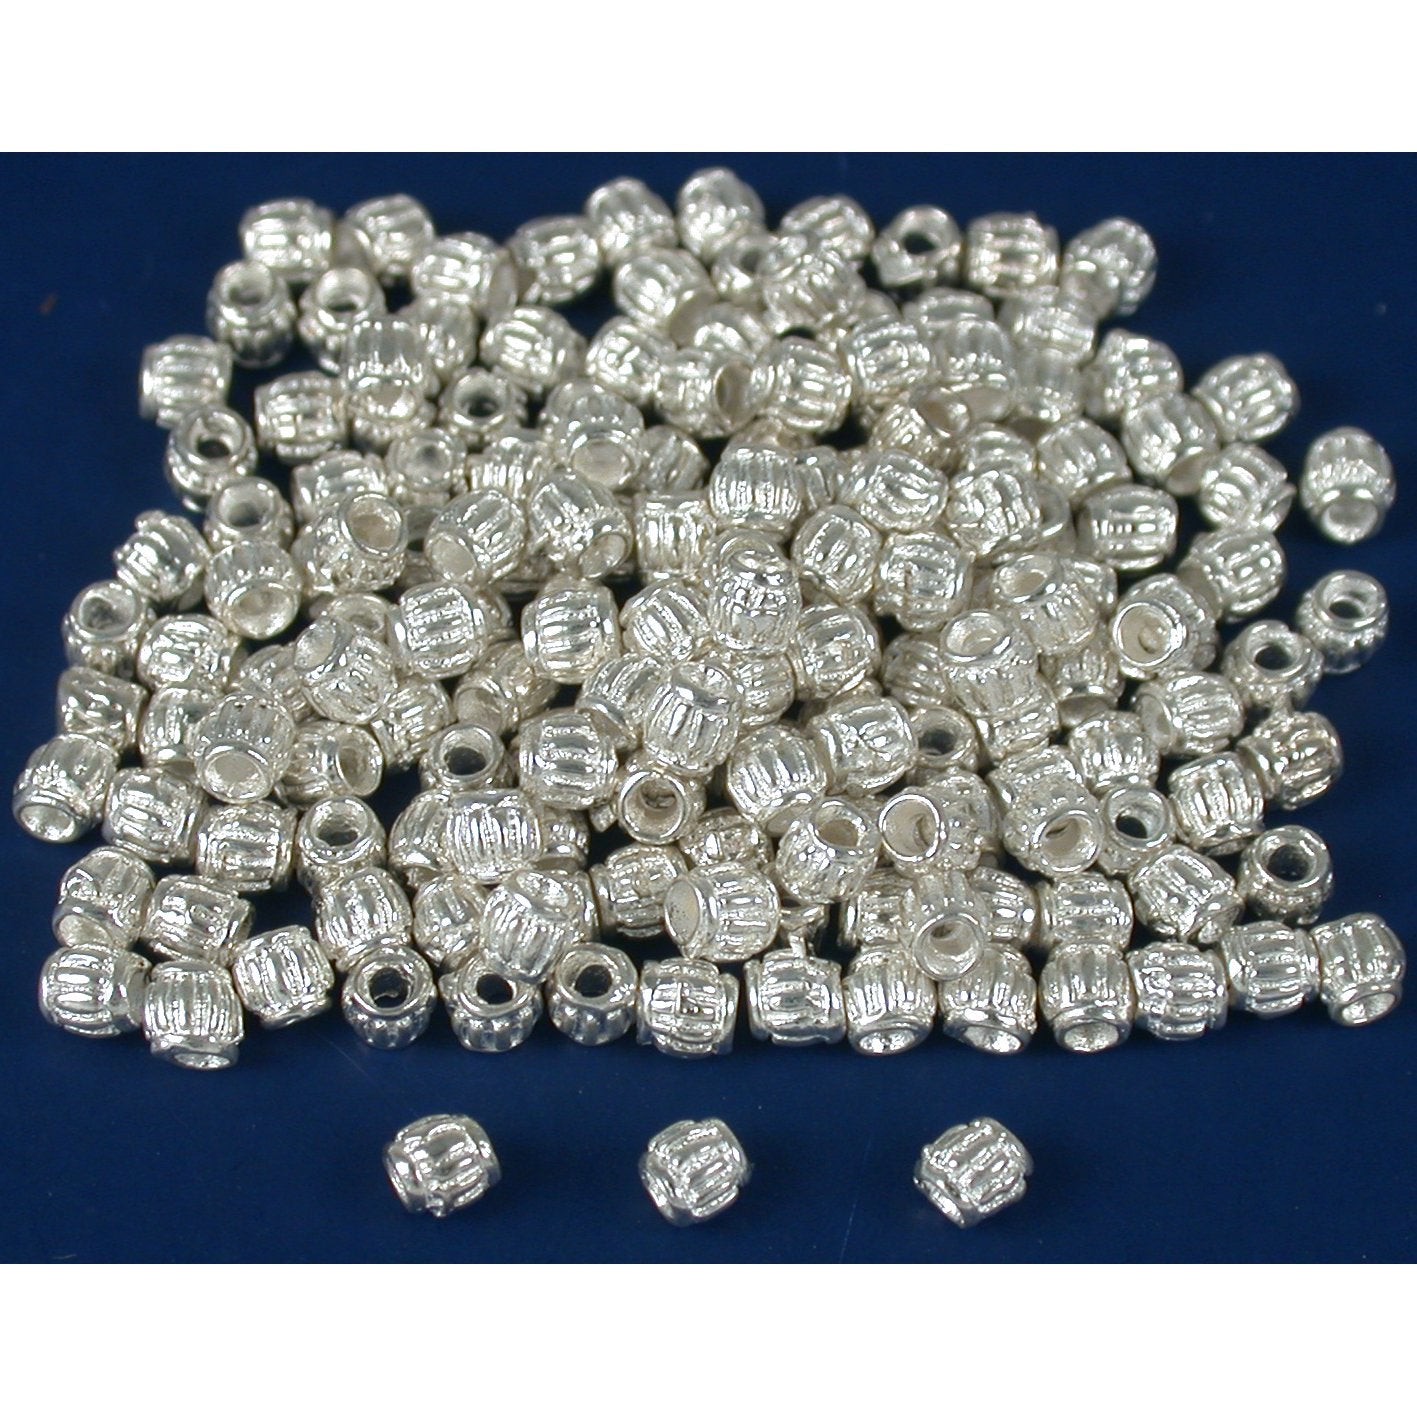 Bali Tube Beads Silver Plated 3mm 160Pcs Approx.